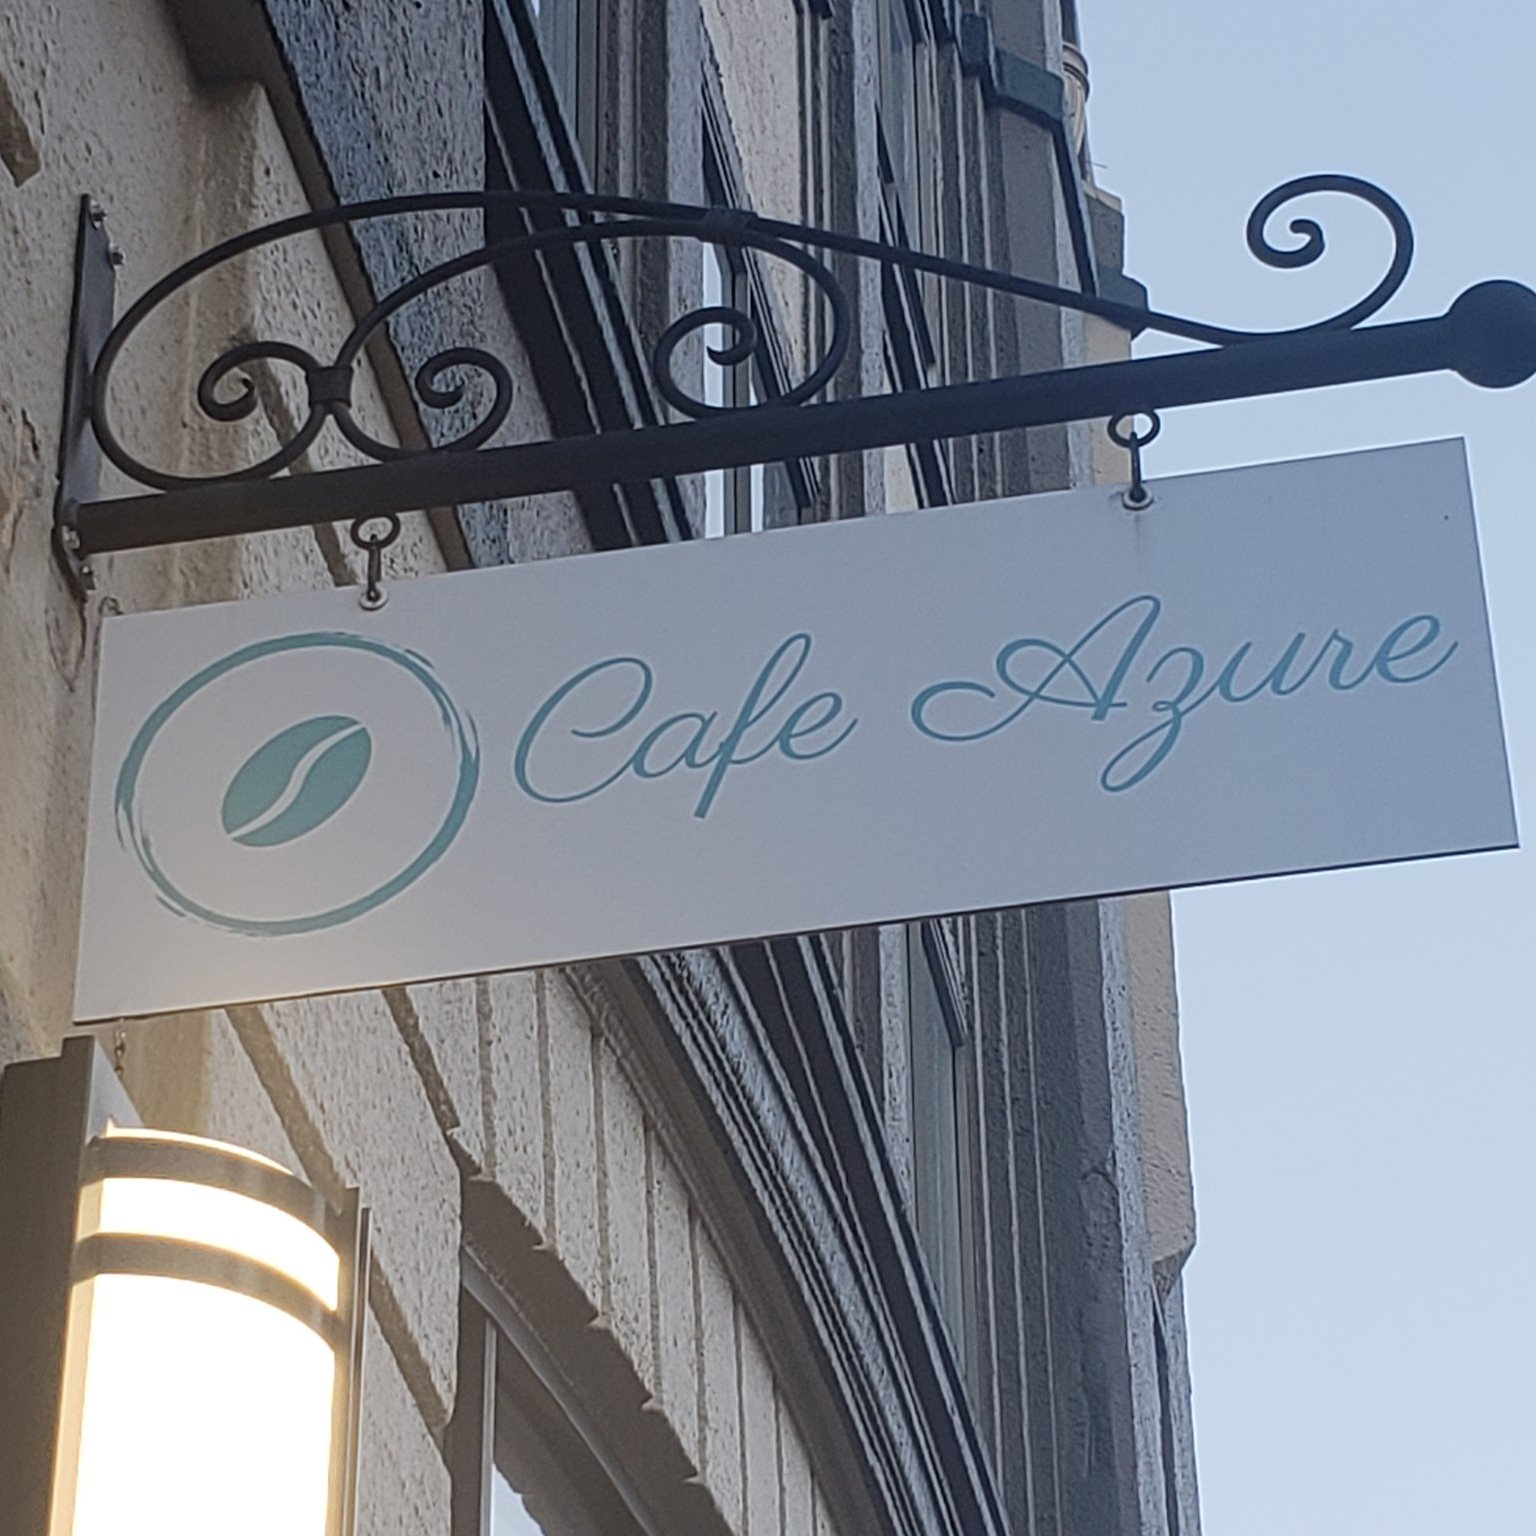 The sign outside Cafe Azure